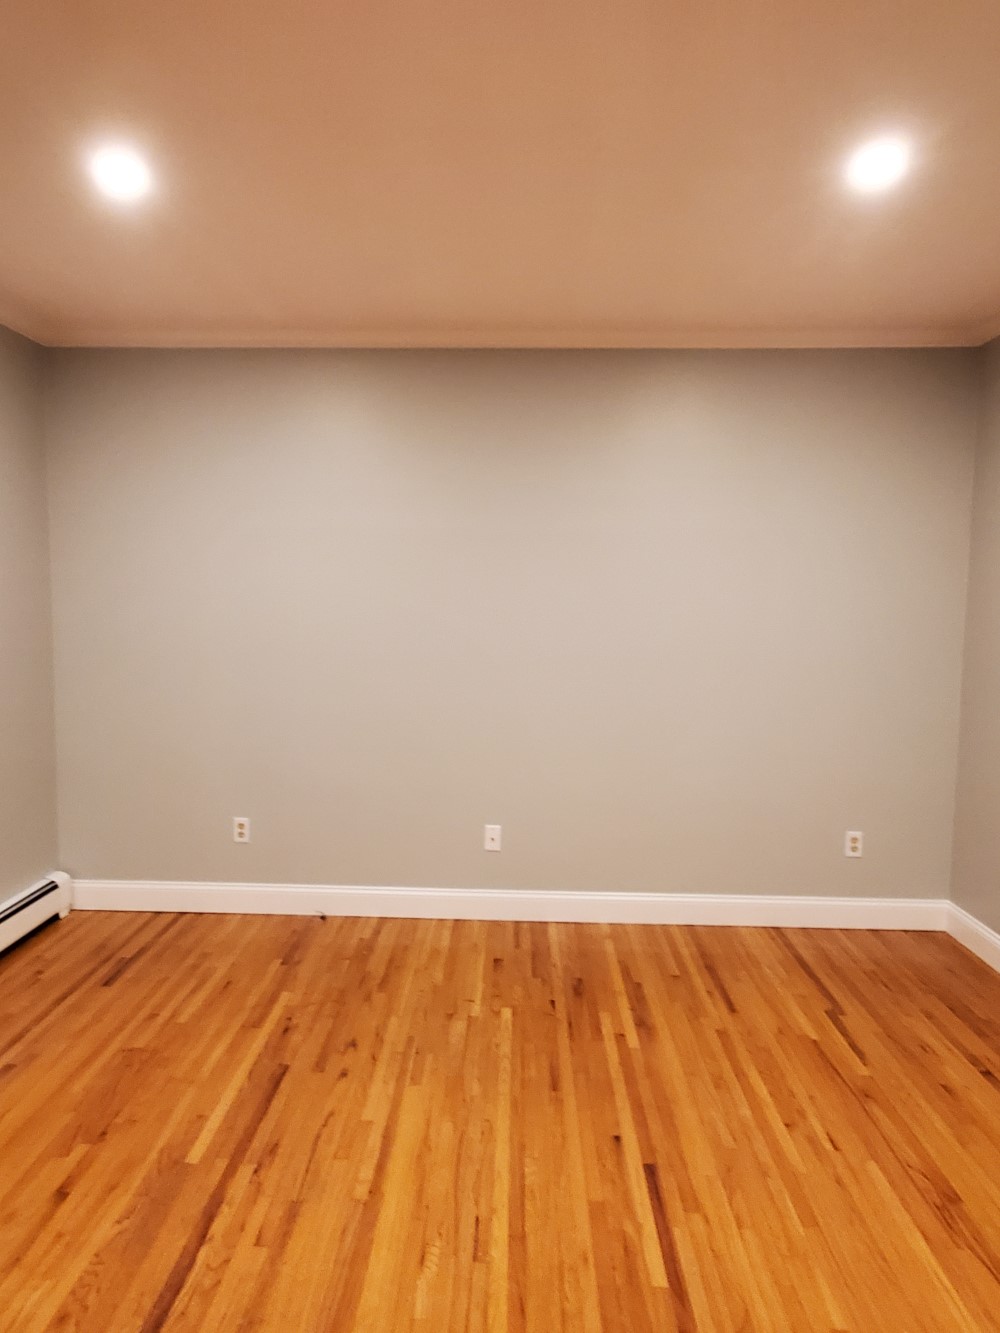 Drywall, Carpentry, and Painting in Hudson, MA 01749